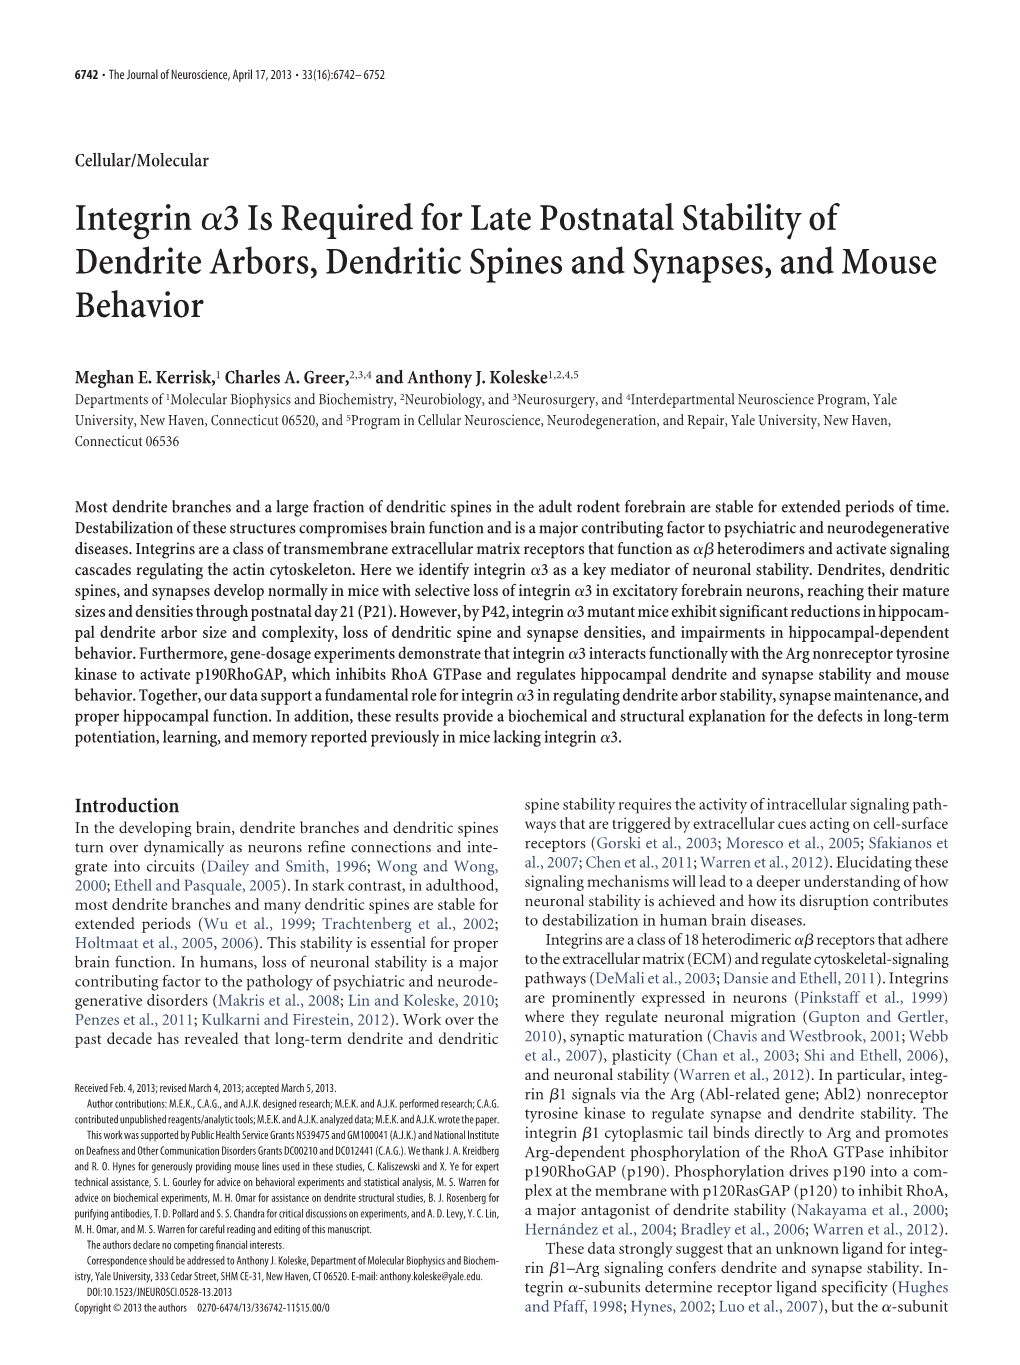 Integrinɑ3 Is Required for Late Postnatal Stability of Dendrite